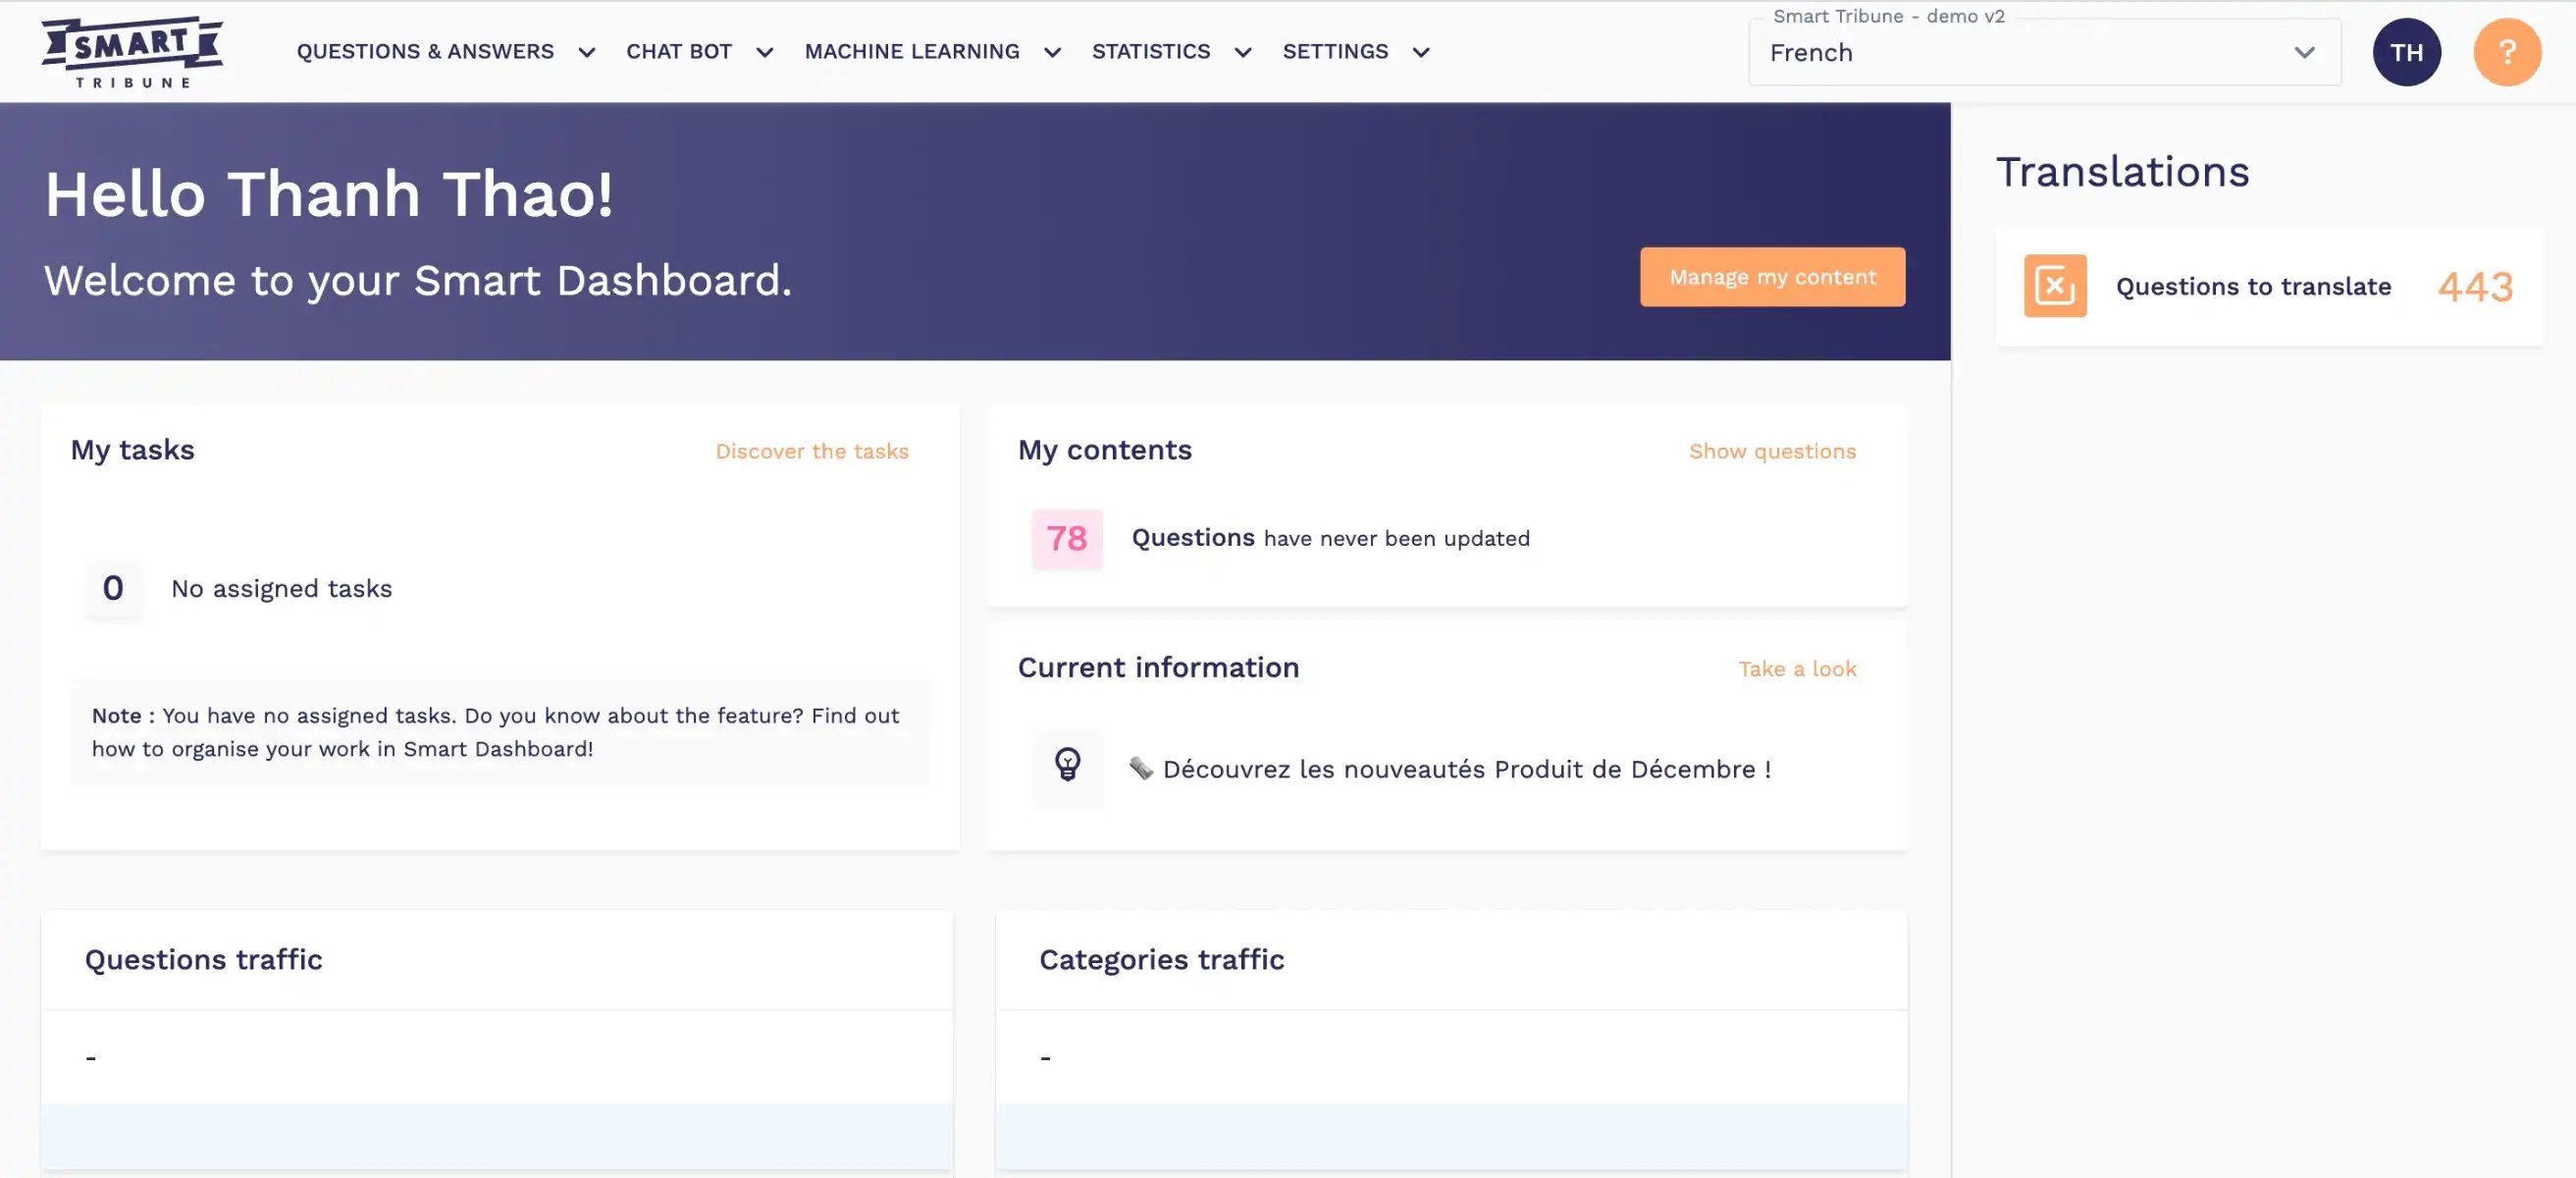 Smart Dashboard to manage knowledge